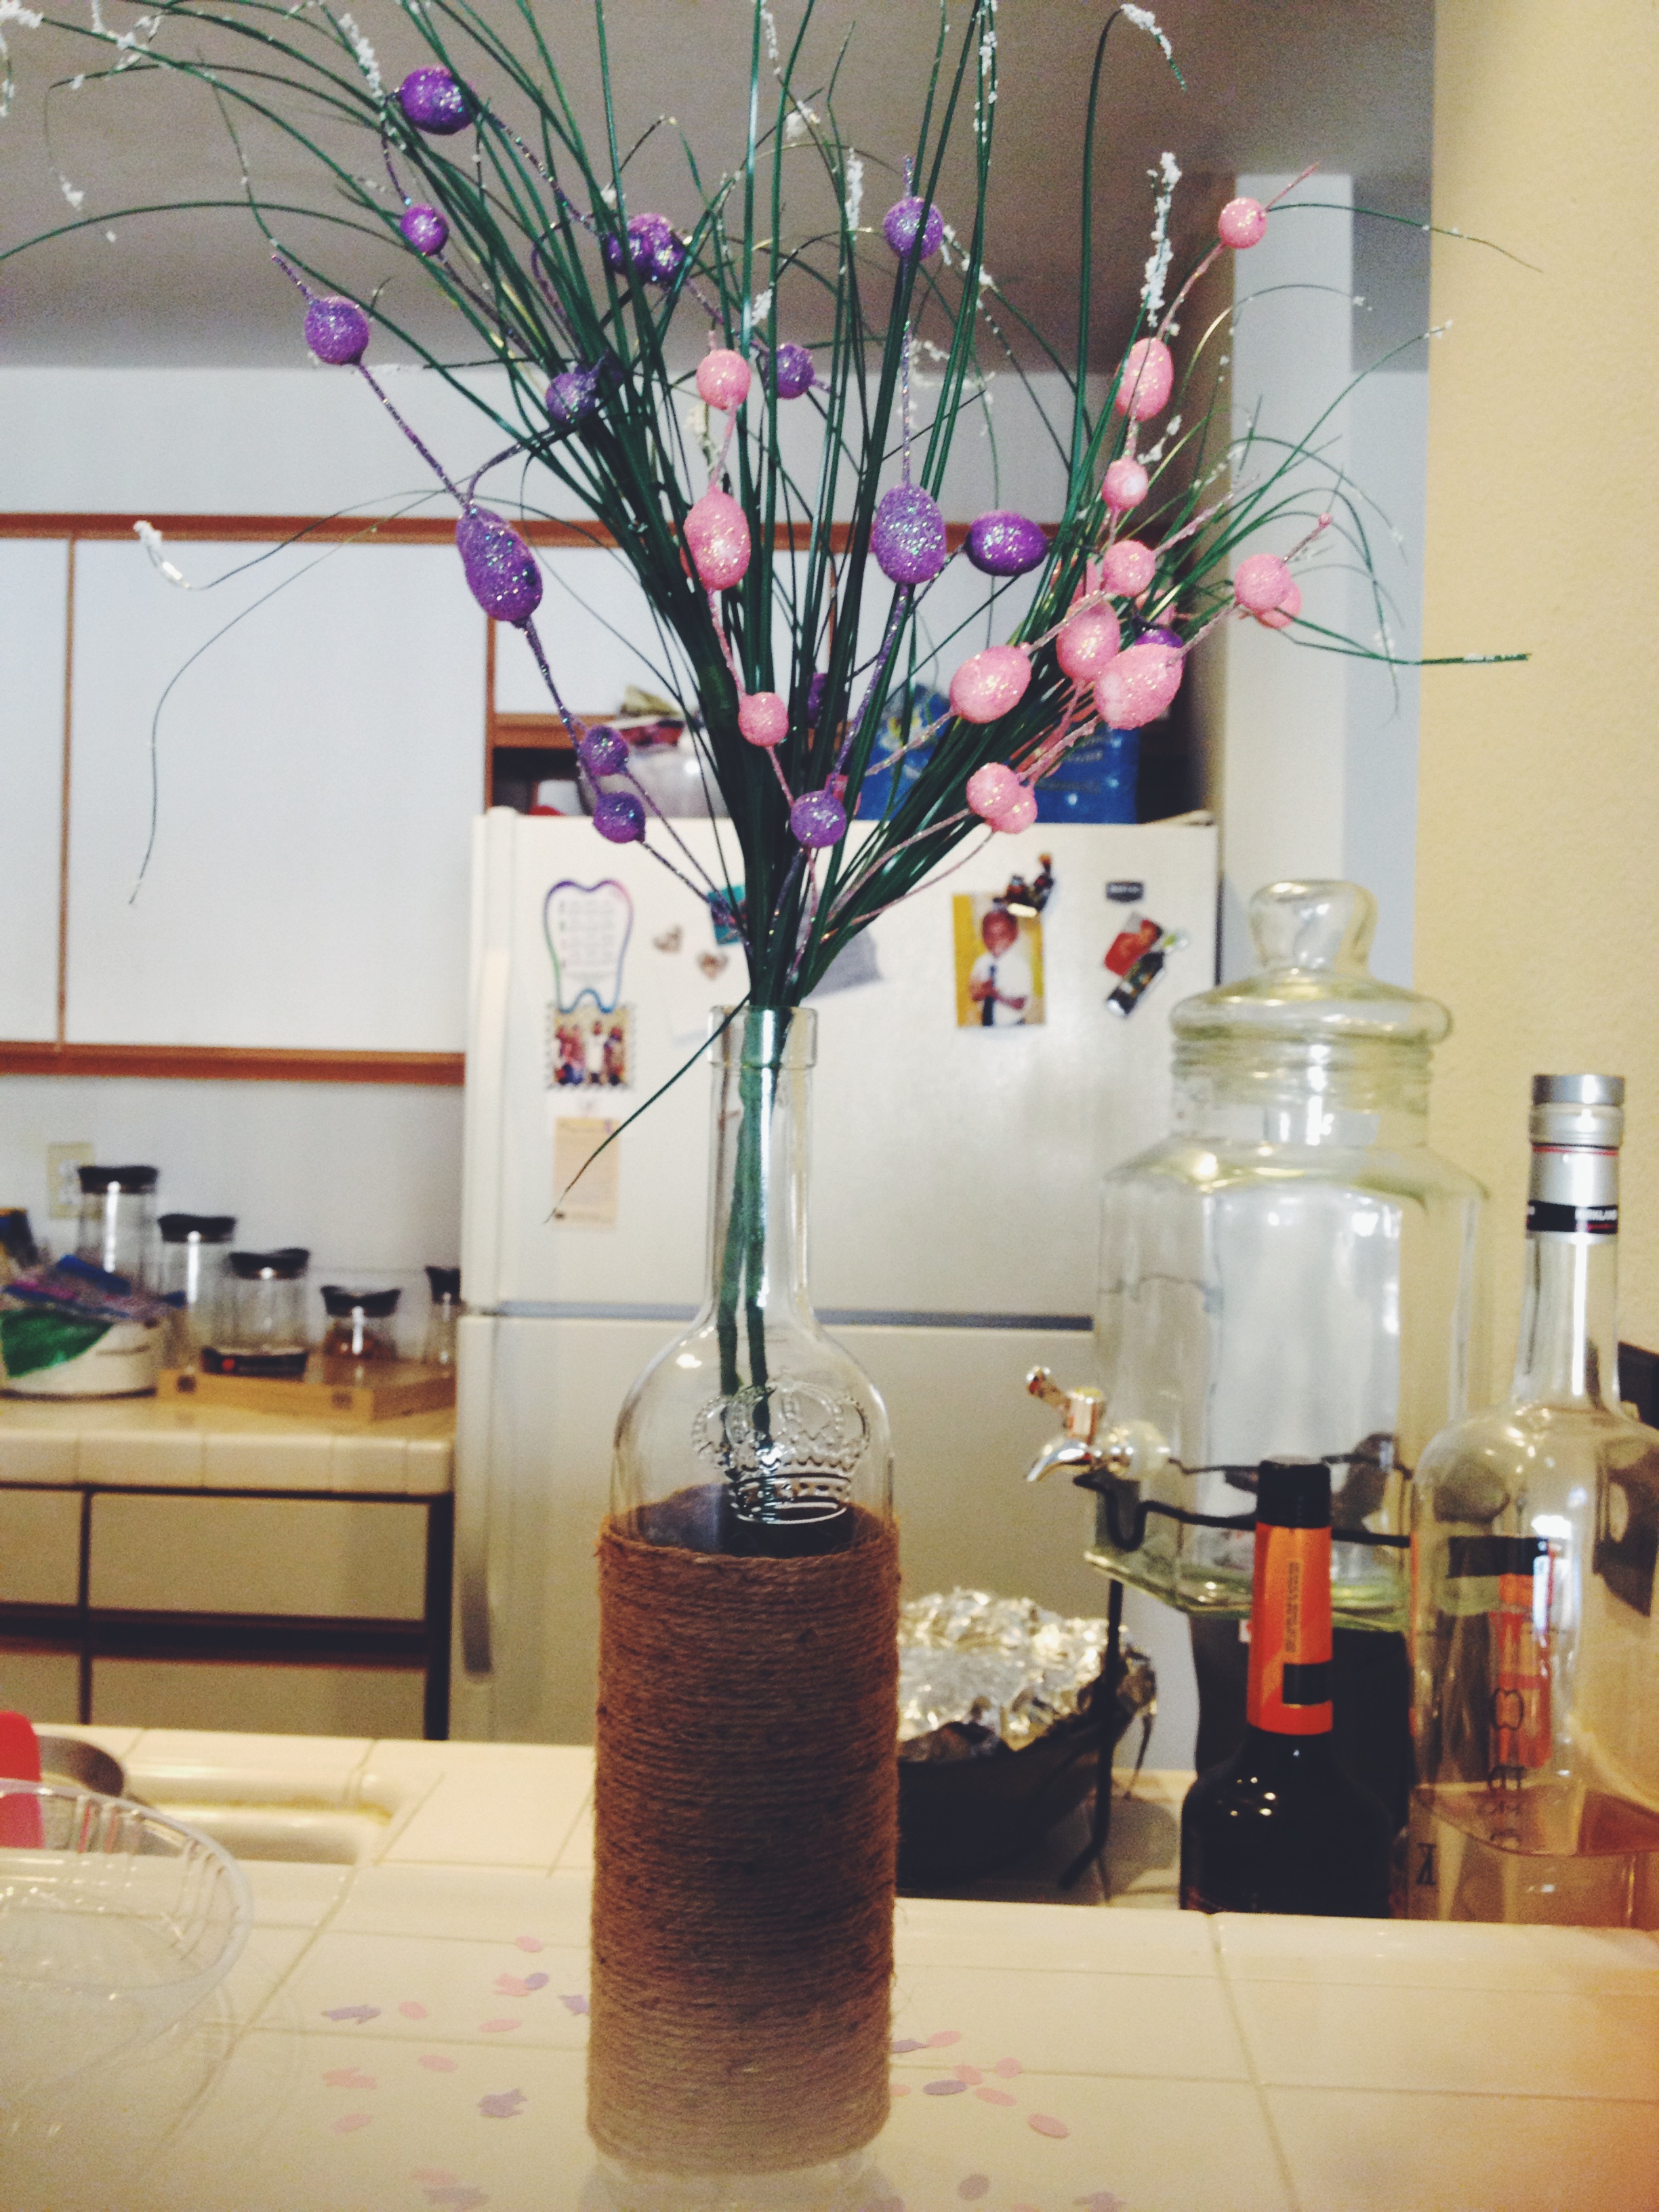 A cute DIY project using a wine bottle, twine and branches with spring bulbs